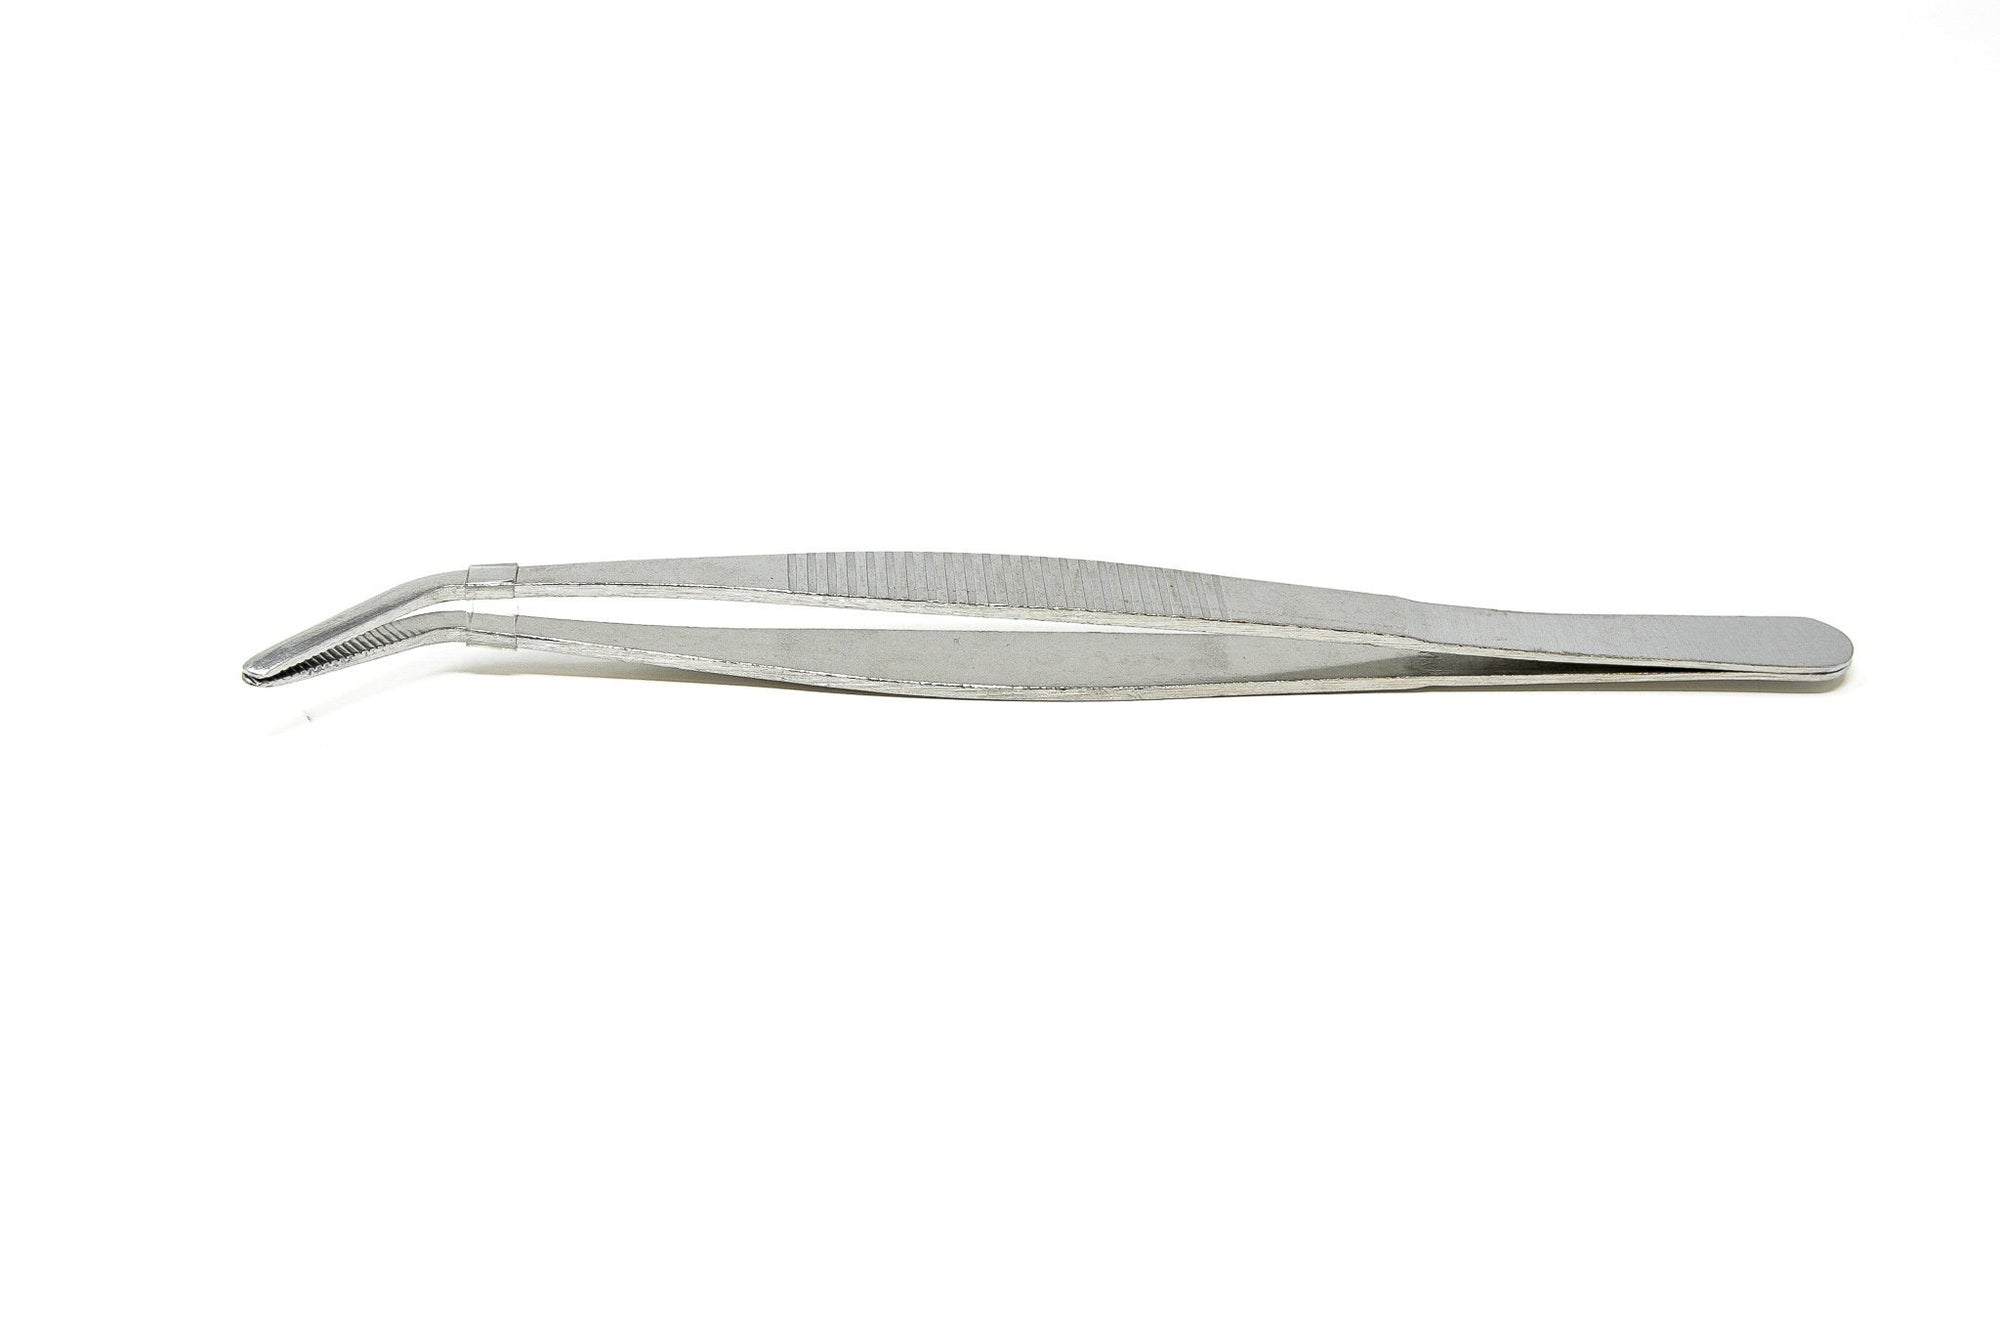 Butterfly Setting Mounting Tools, Entomology Taxidermy Equipment, Stainless Steel Forceps